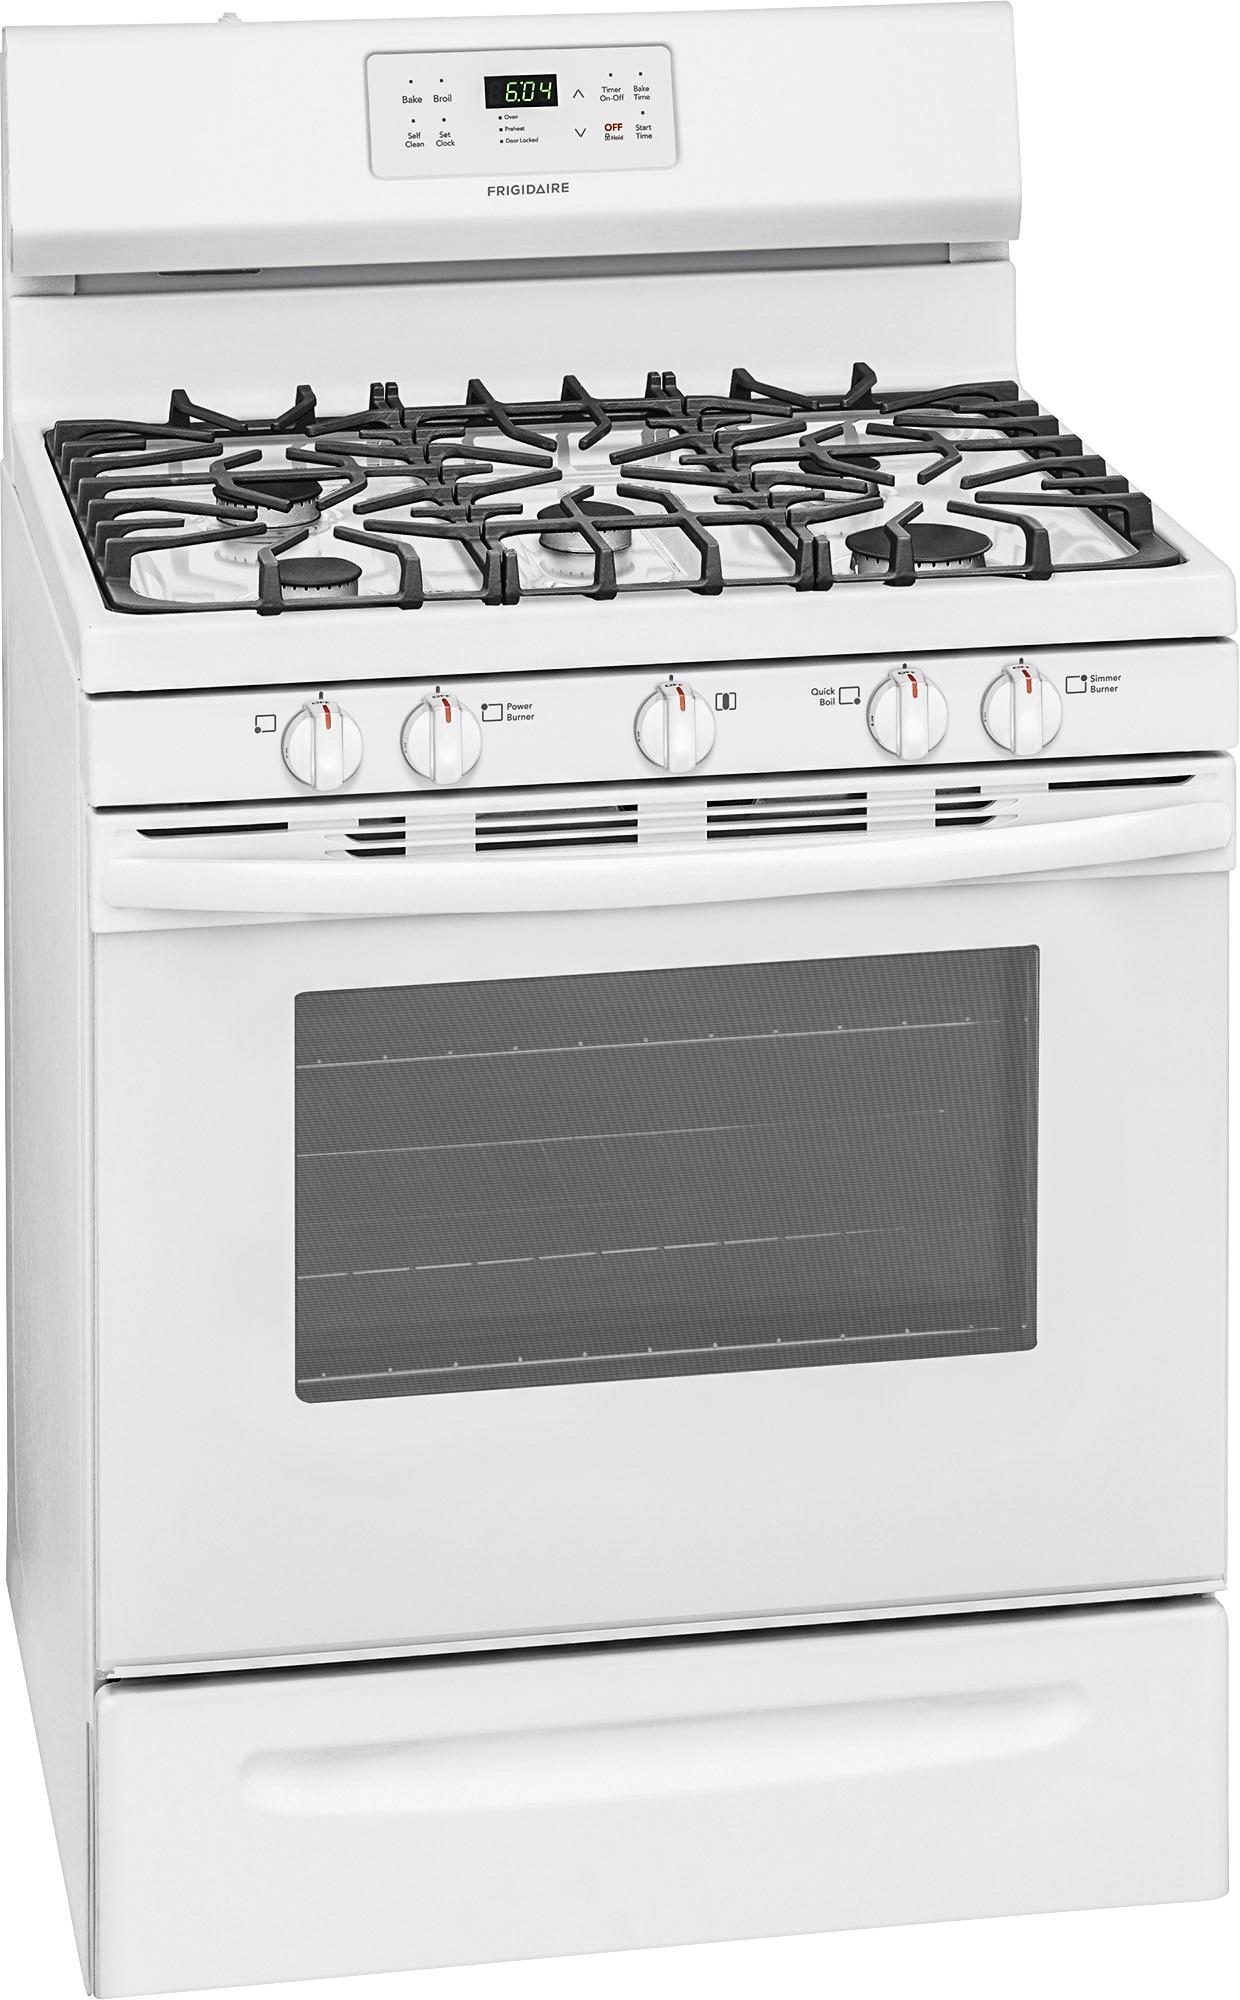 Angle View: Frigidaire - 5.0 Cu. Ft. Self-Cleaning Freestanding Gas Range - Black stainless steel